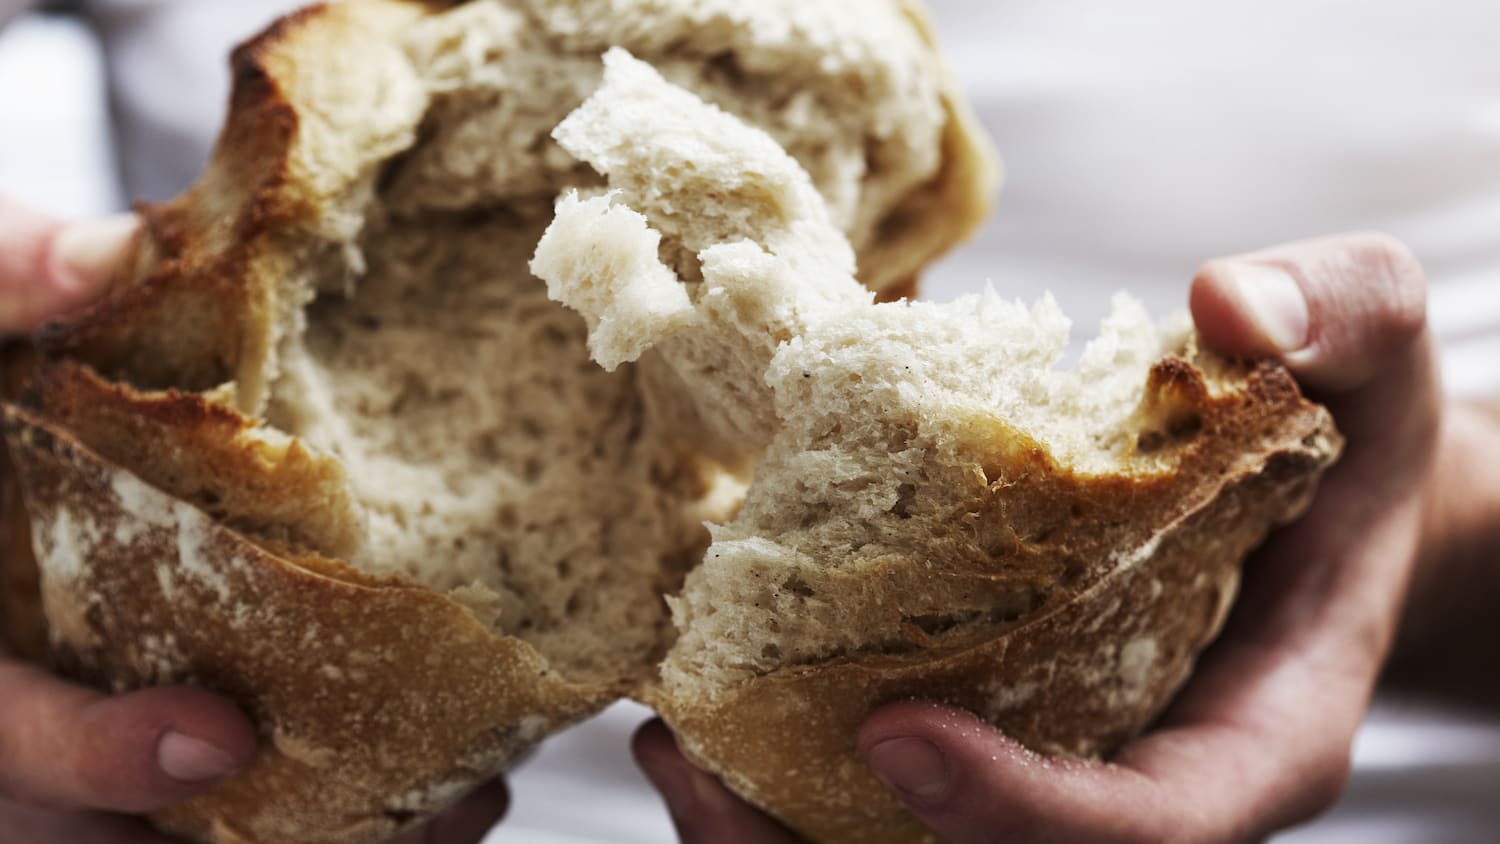 This Is the Only Type of Bread You Should Be Eating, According to a Cardiologist